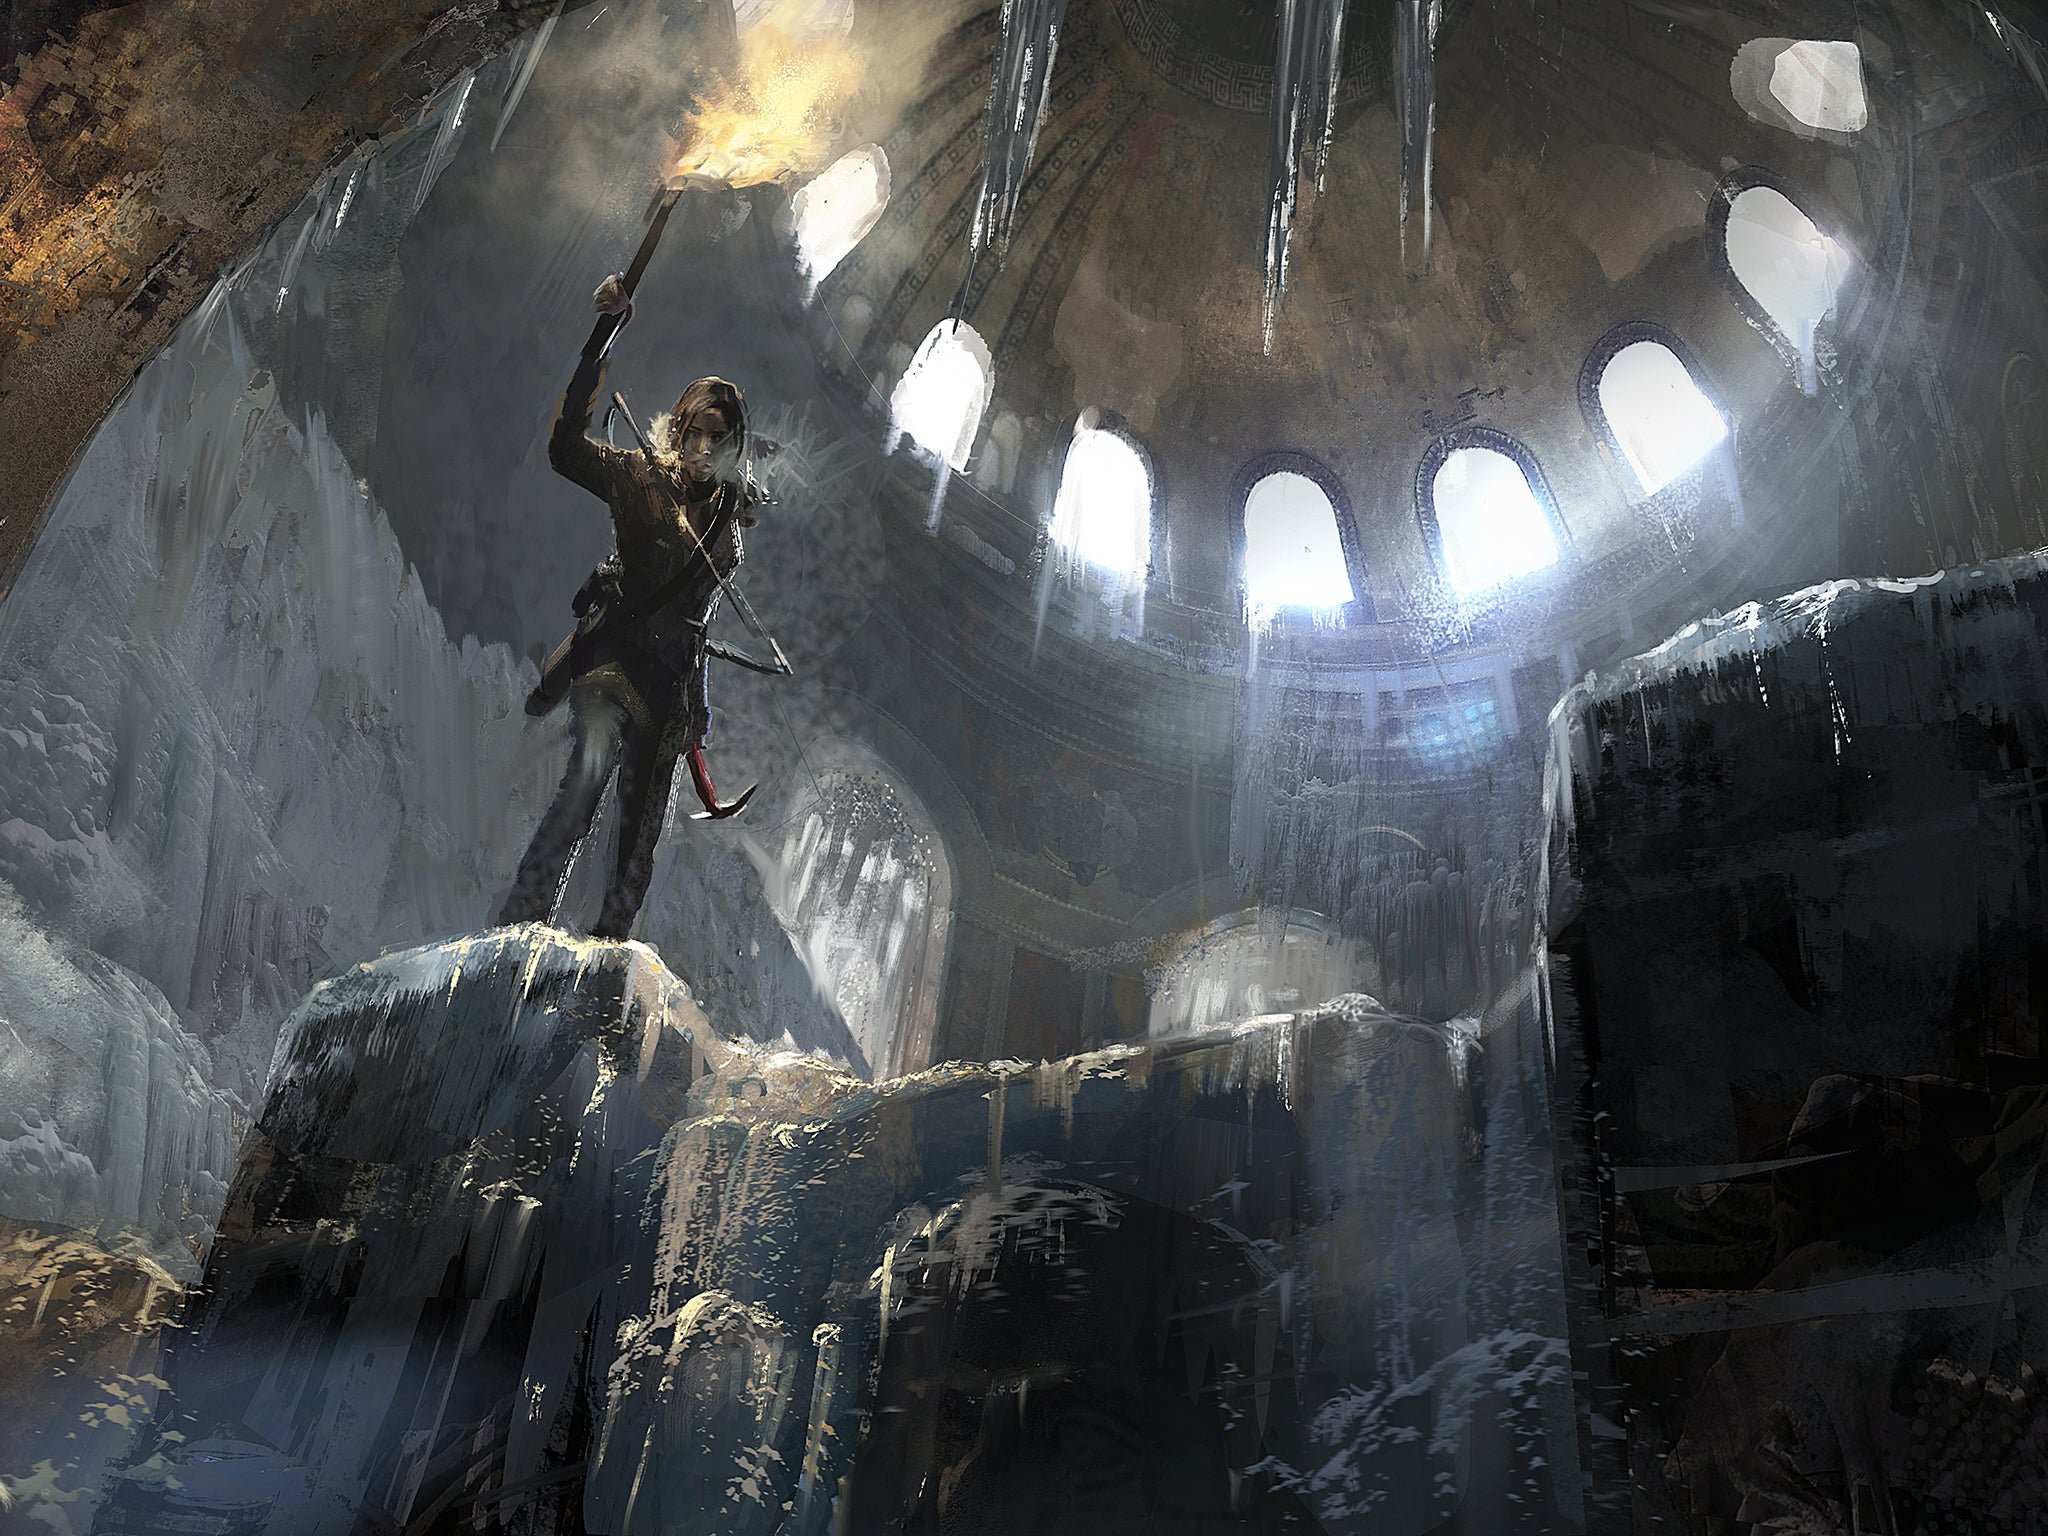 'Rise of the Tomb Raider' arrives on Xbox One on 13 November